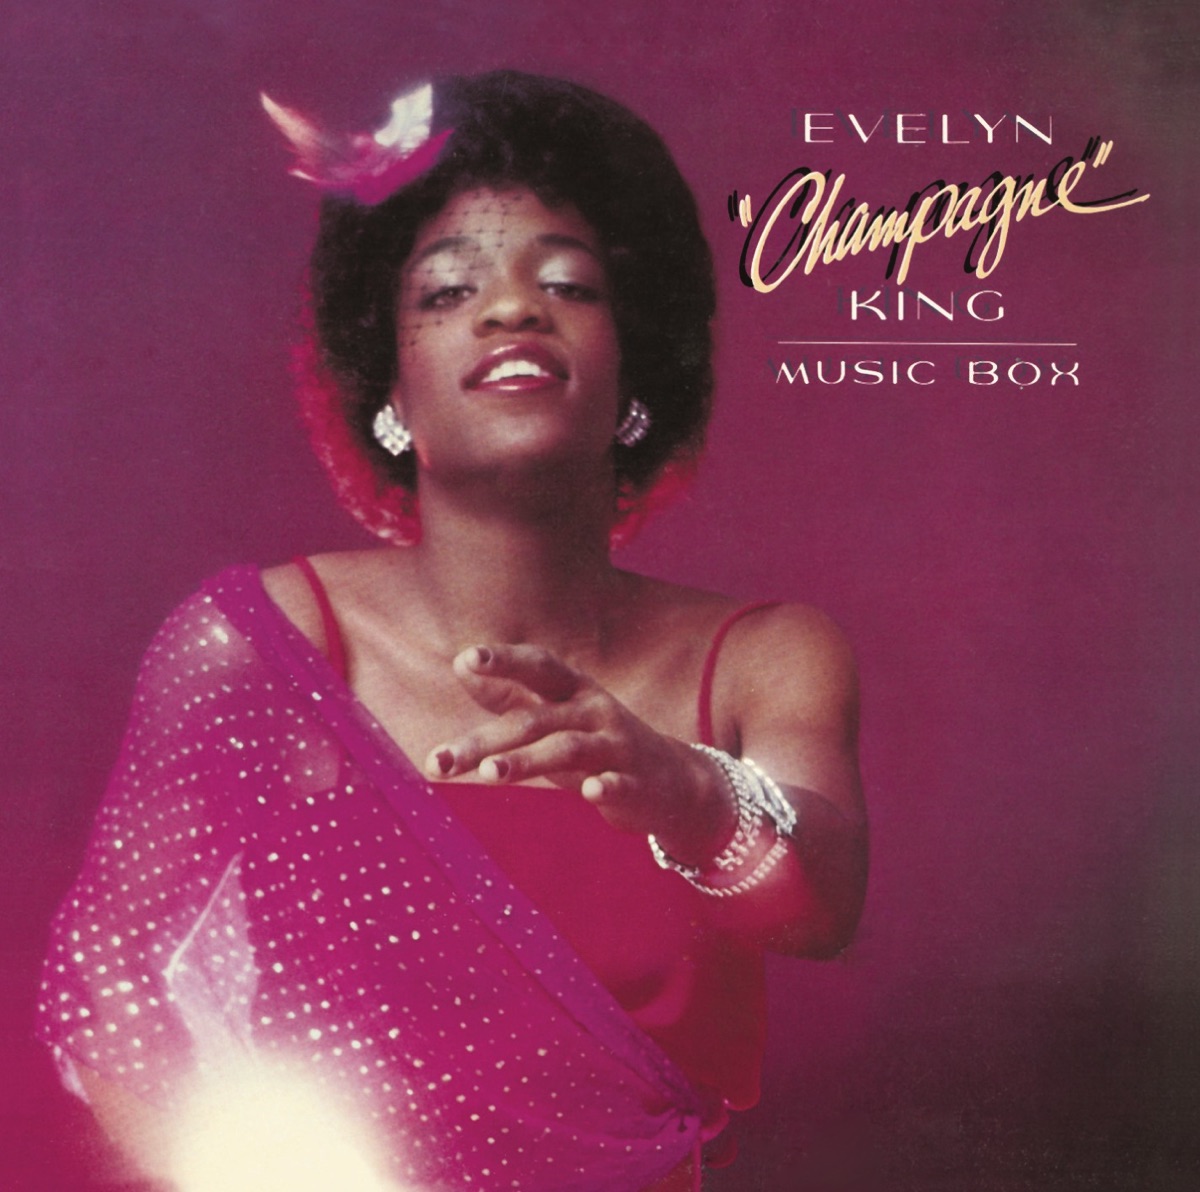 Evelyn &#039;&#039;Champagne&#039;&#039; King Music Box cover artwork